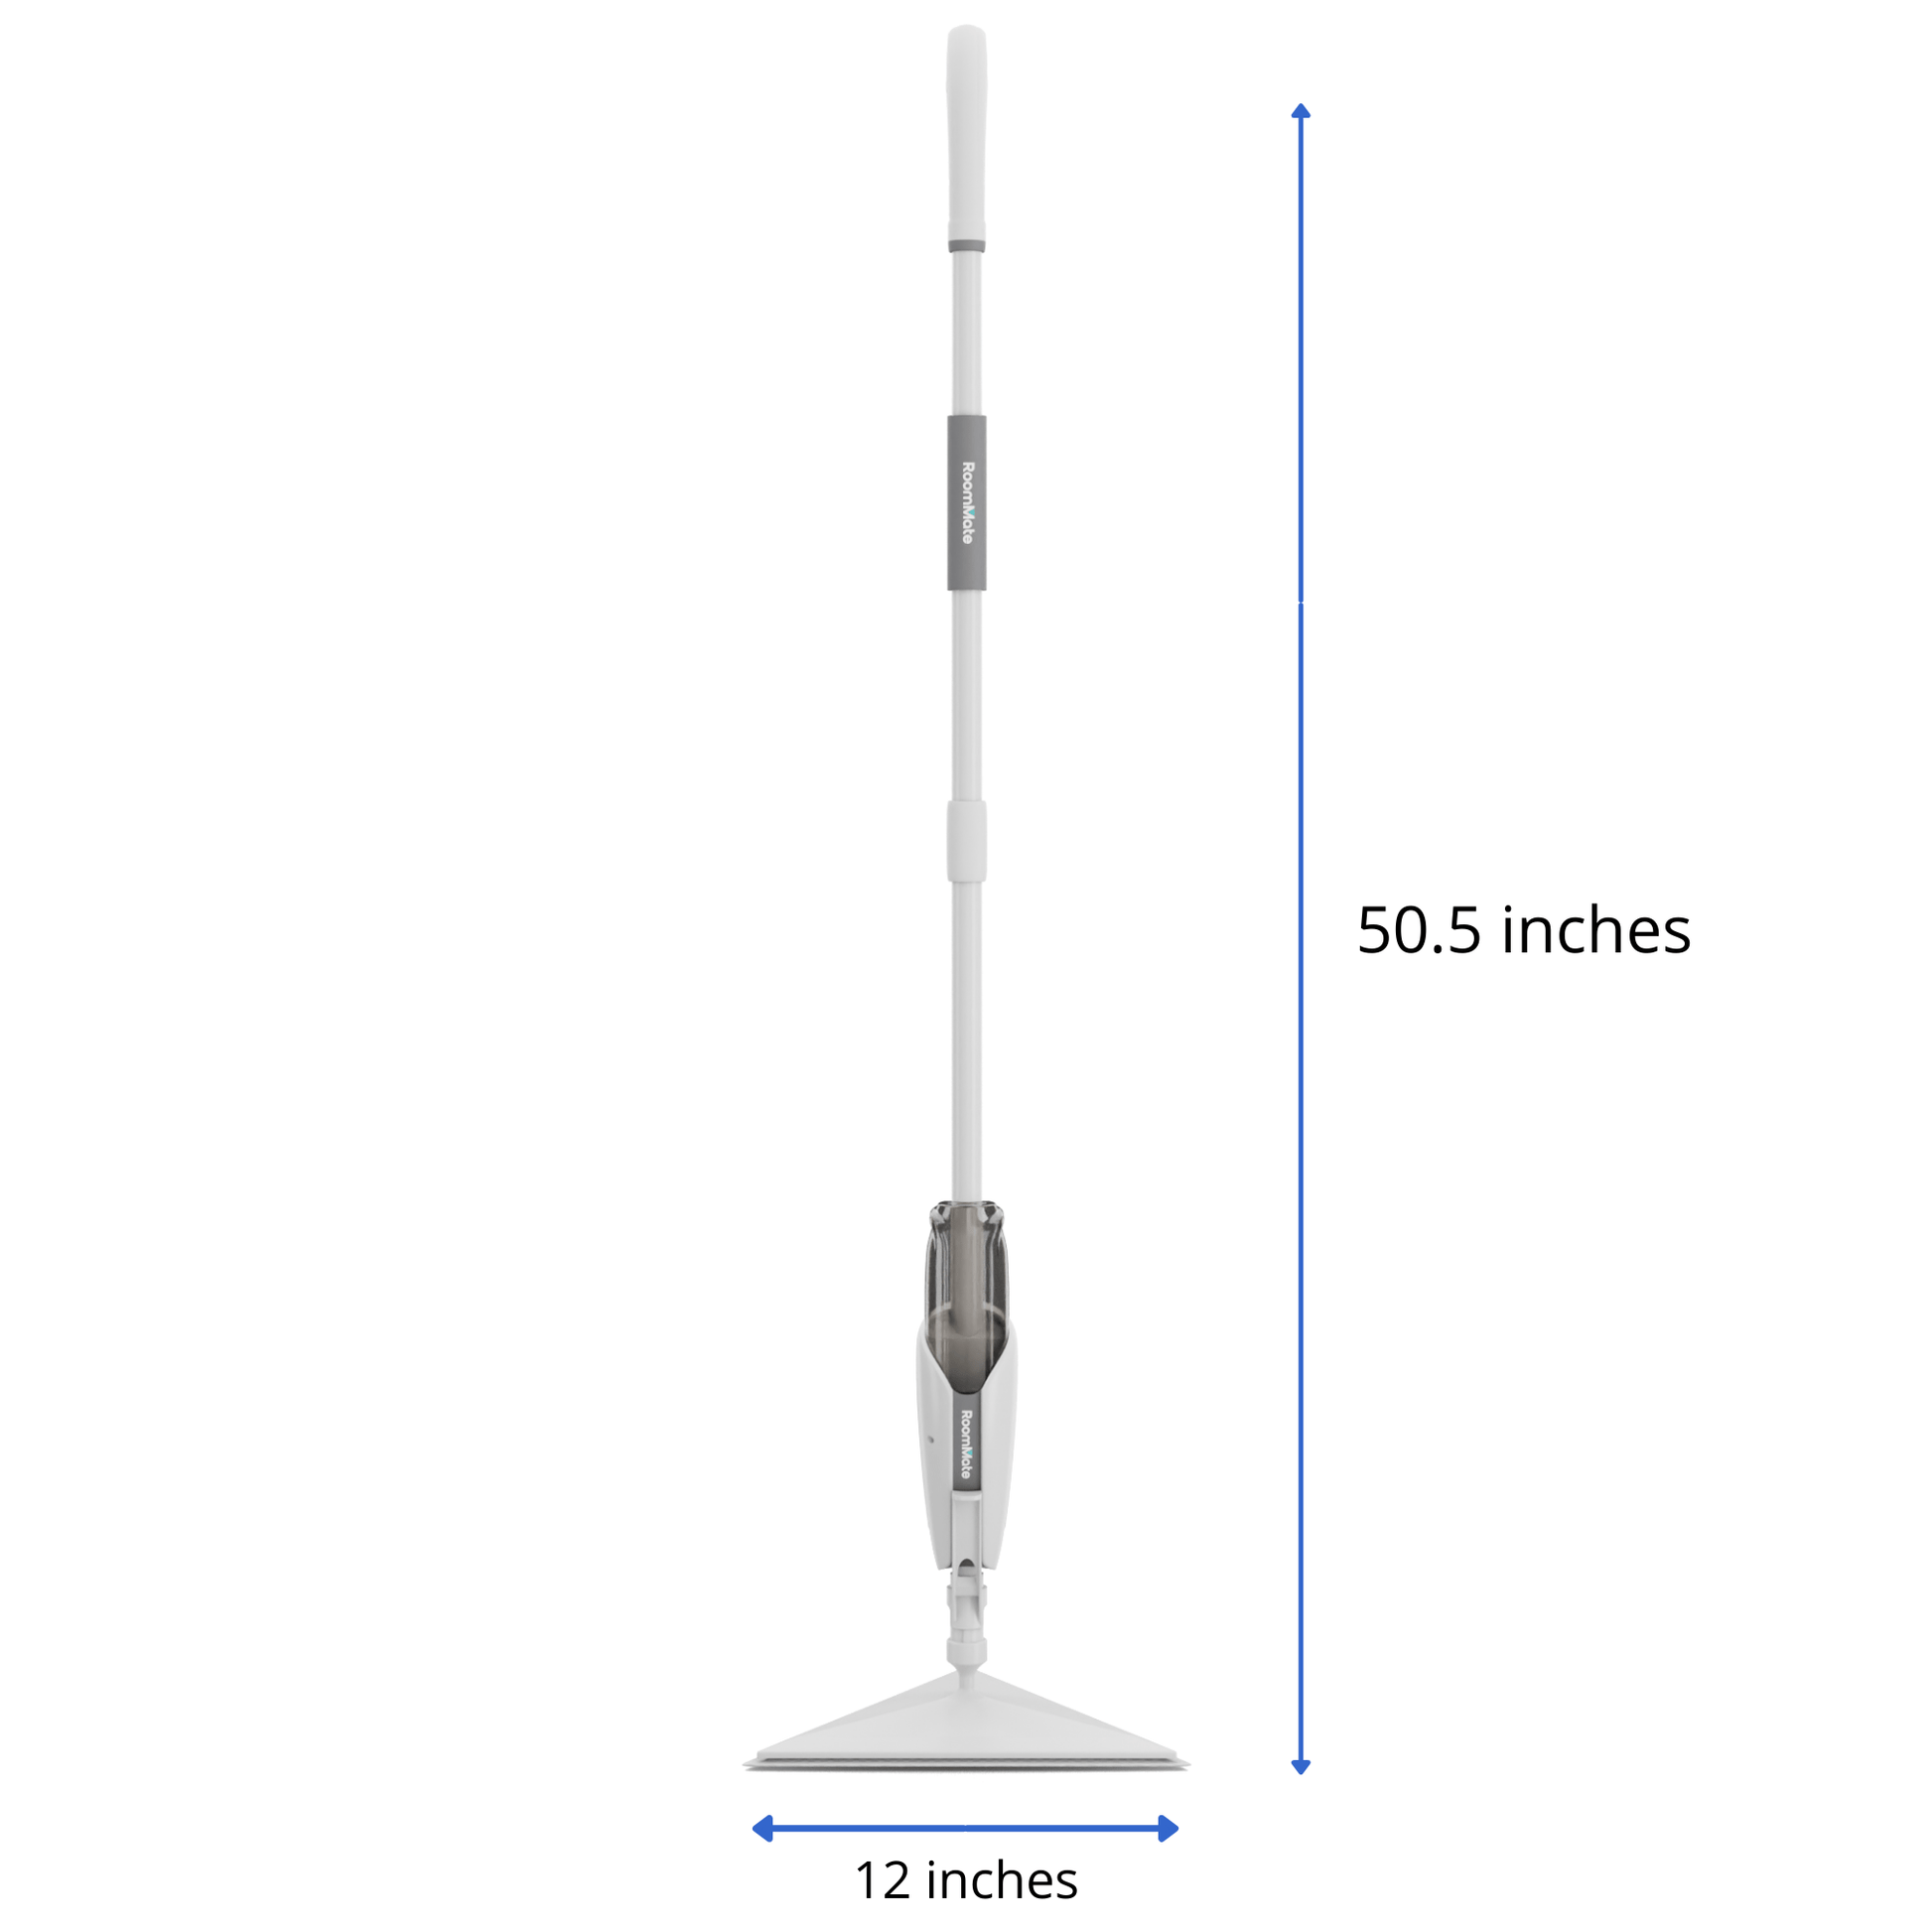 The Roommate Mop with product dimensions